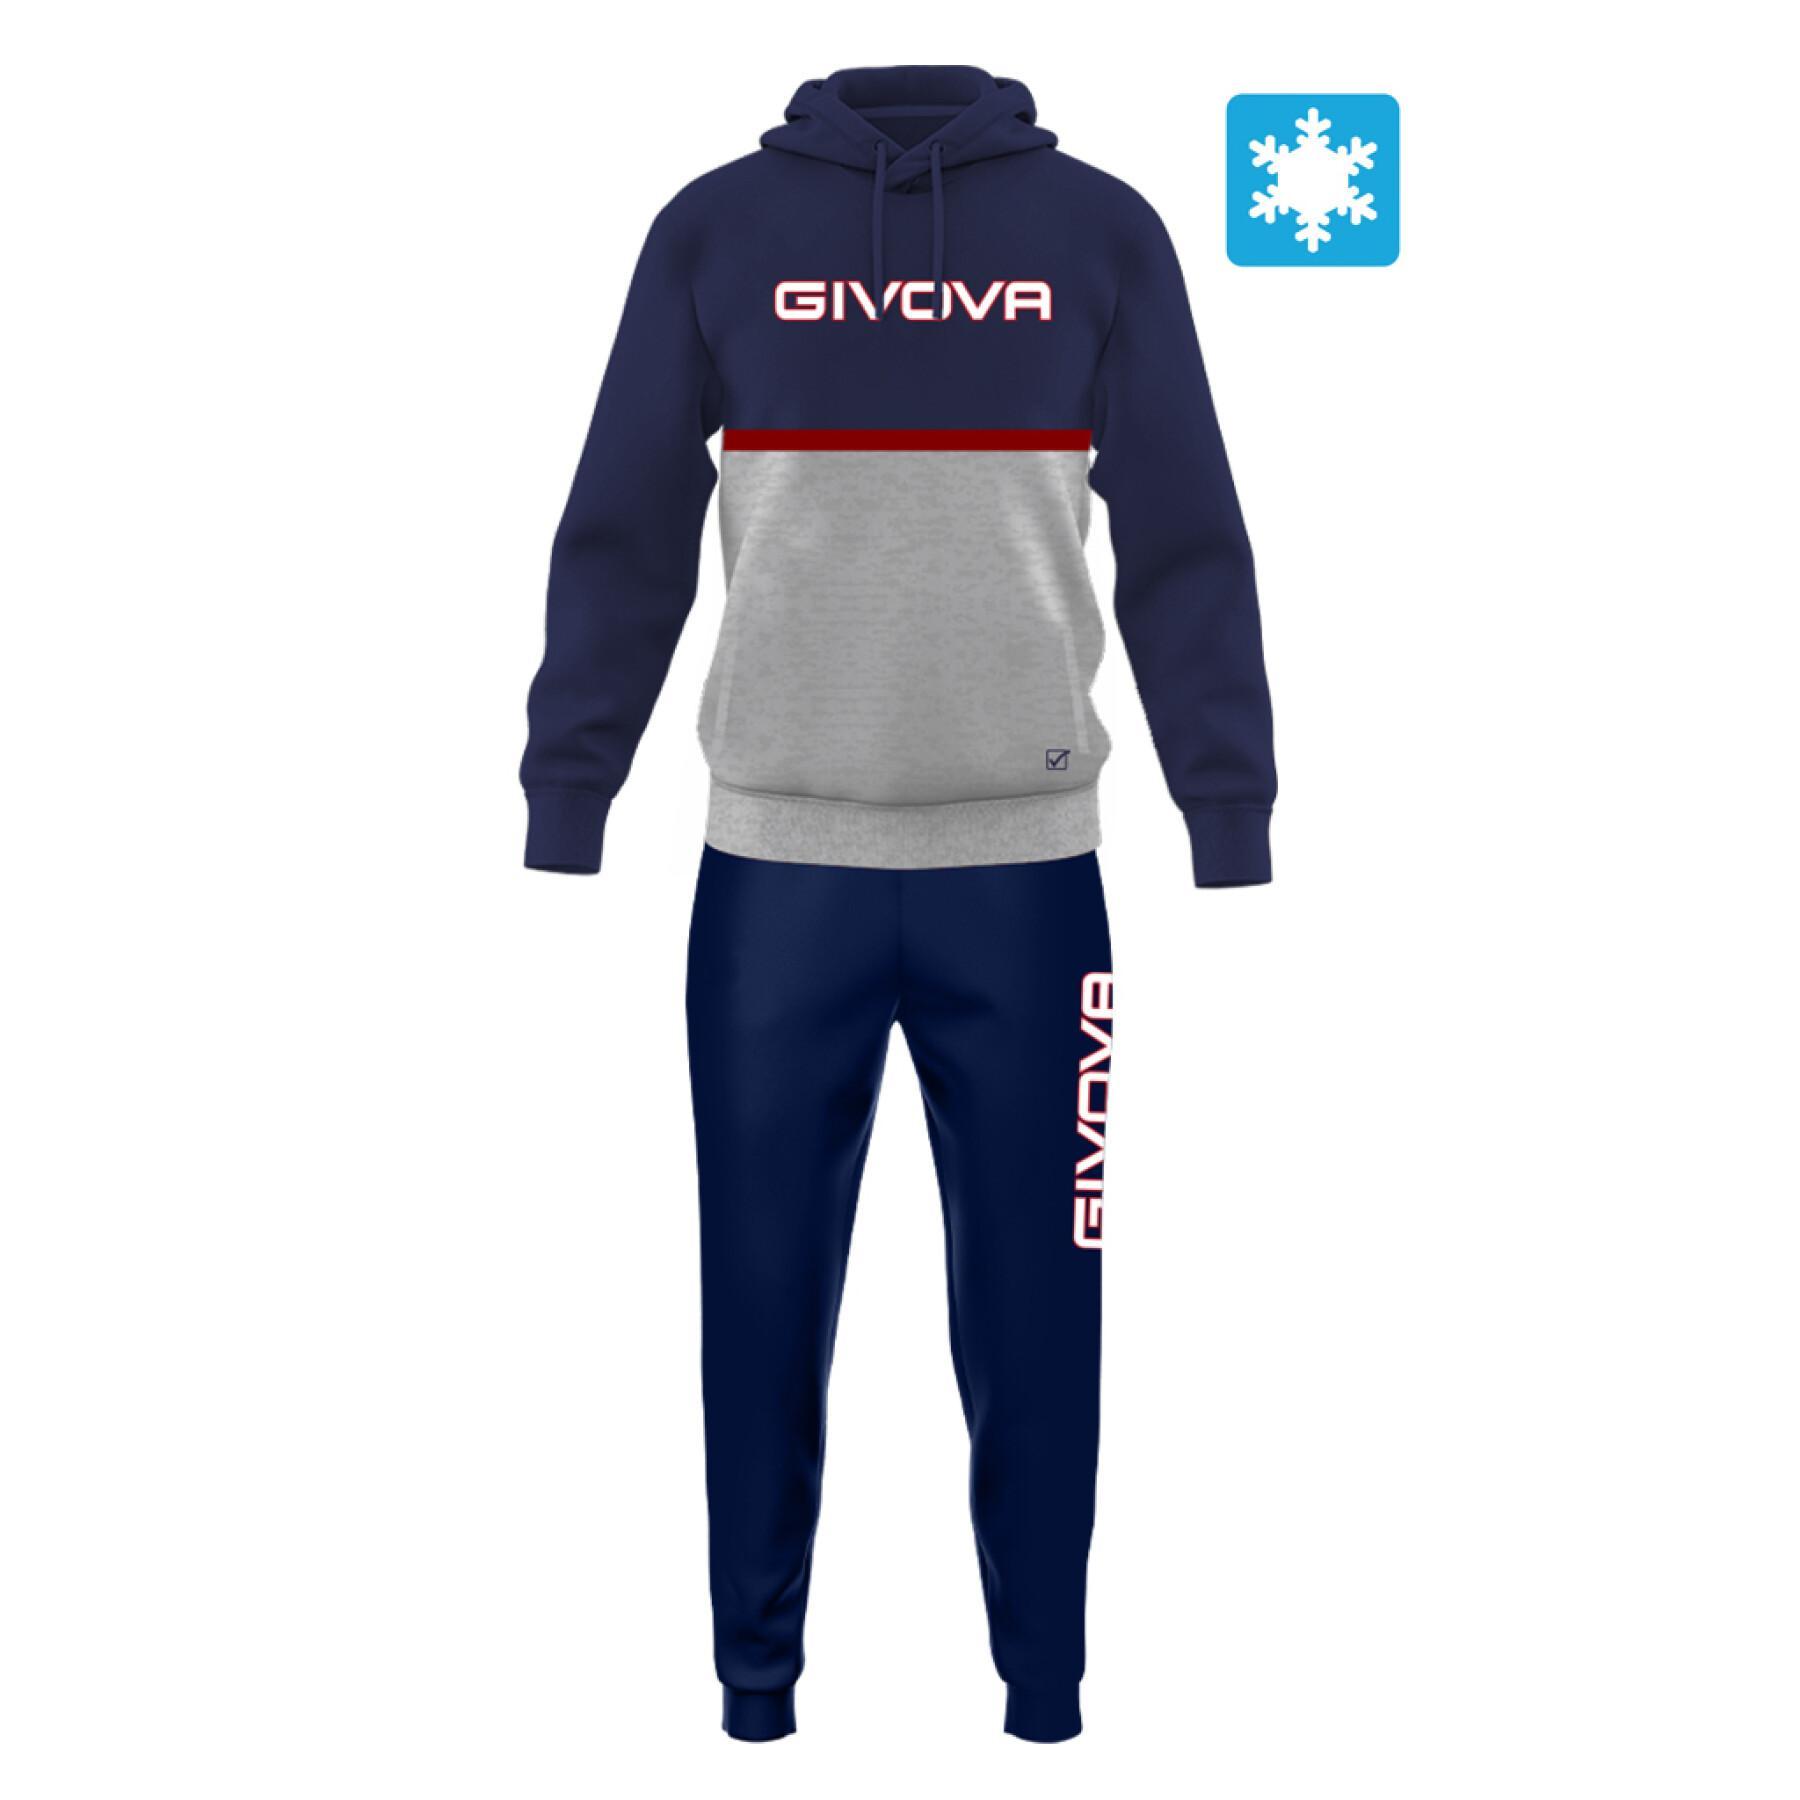 https://media.direct-volley.es/catalog/product/cache/image/1800x/9df78eab33525d08d6e5fb8d27136e95/g/i/givova_lim06-0427.jpg